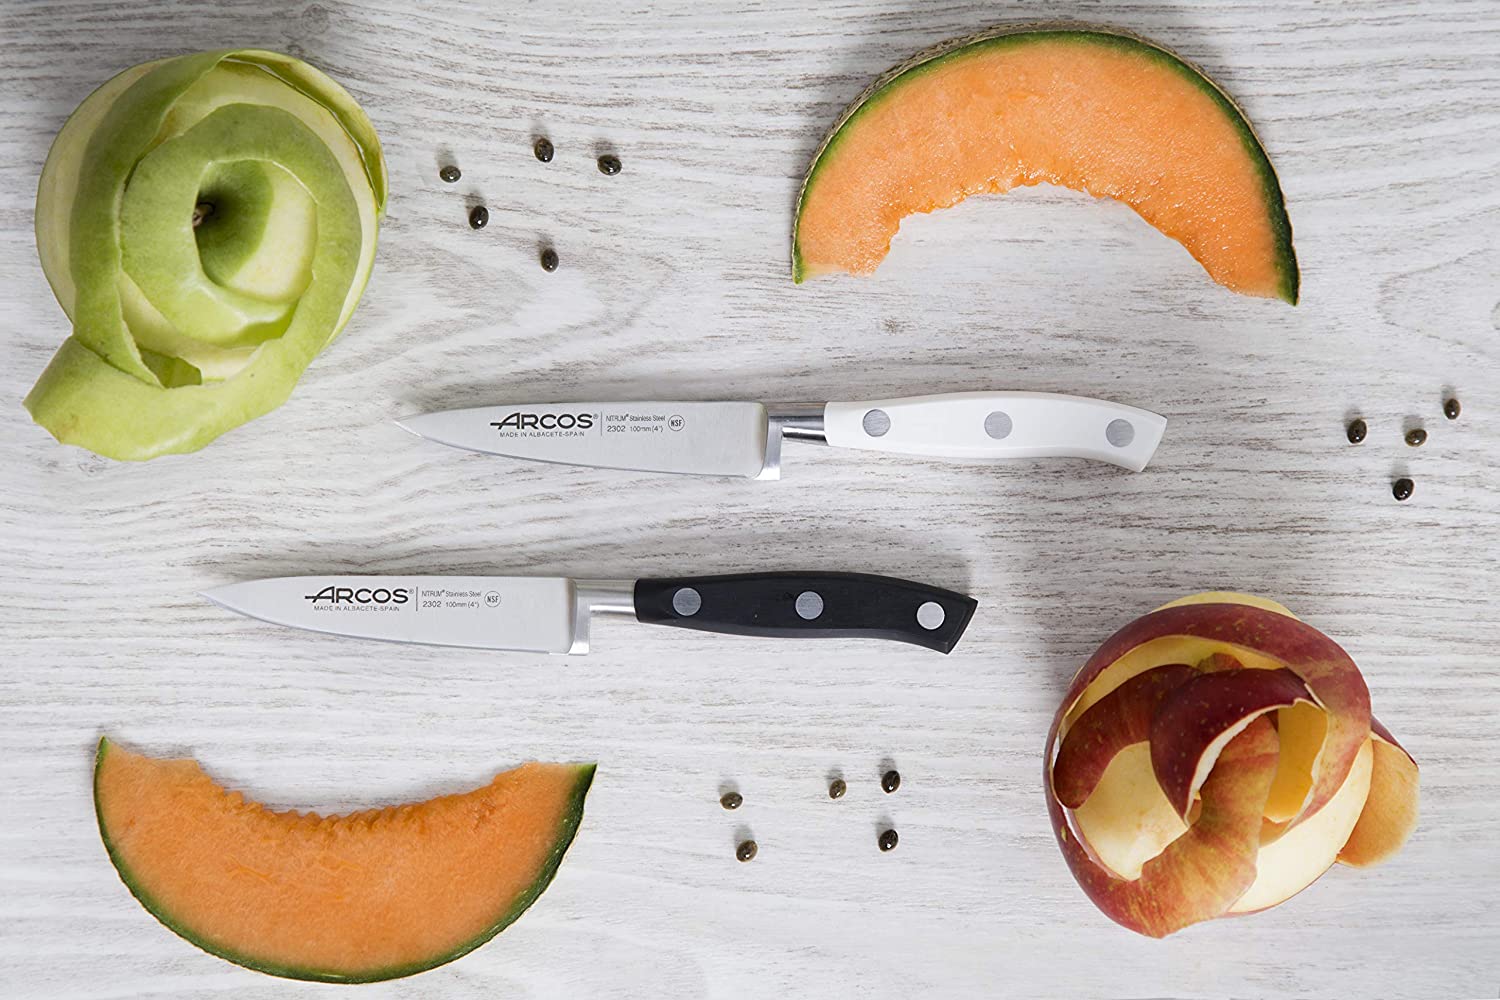 How To Use a Fruit Knife